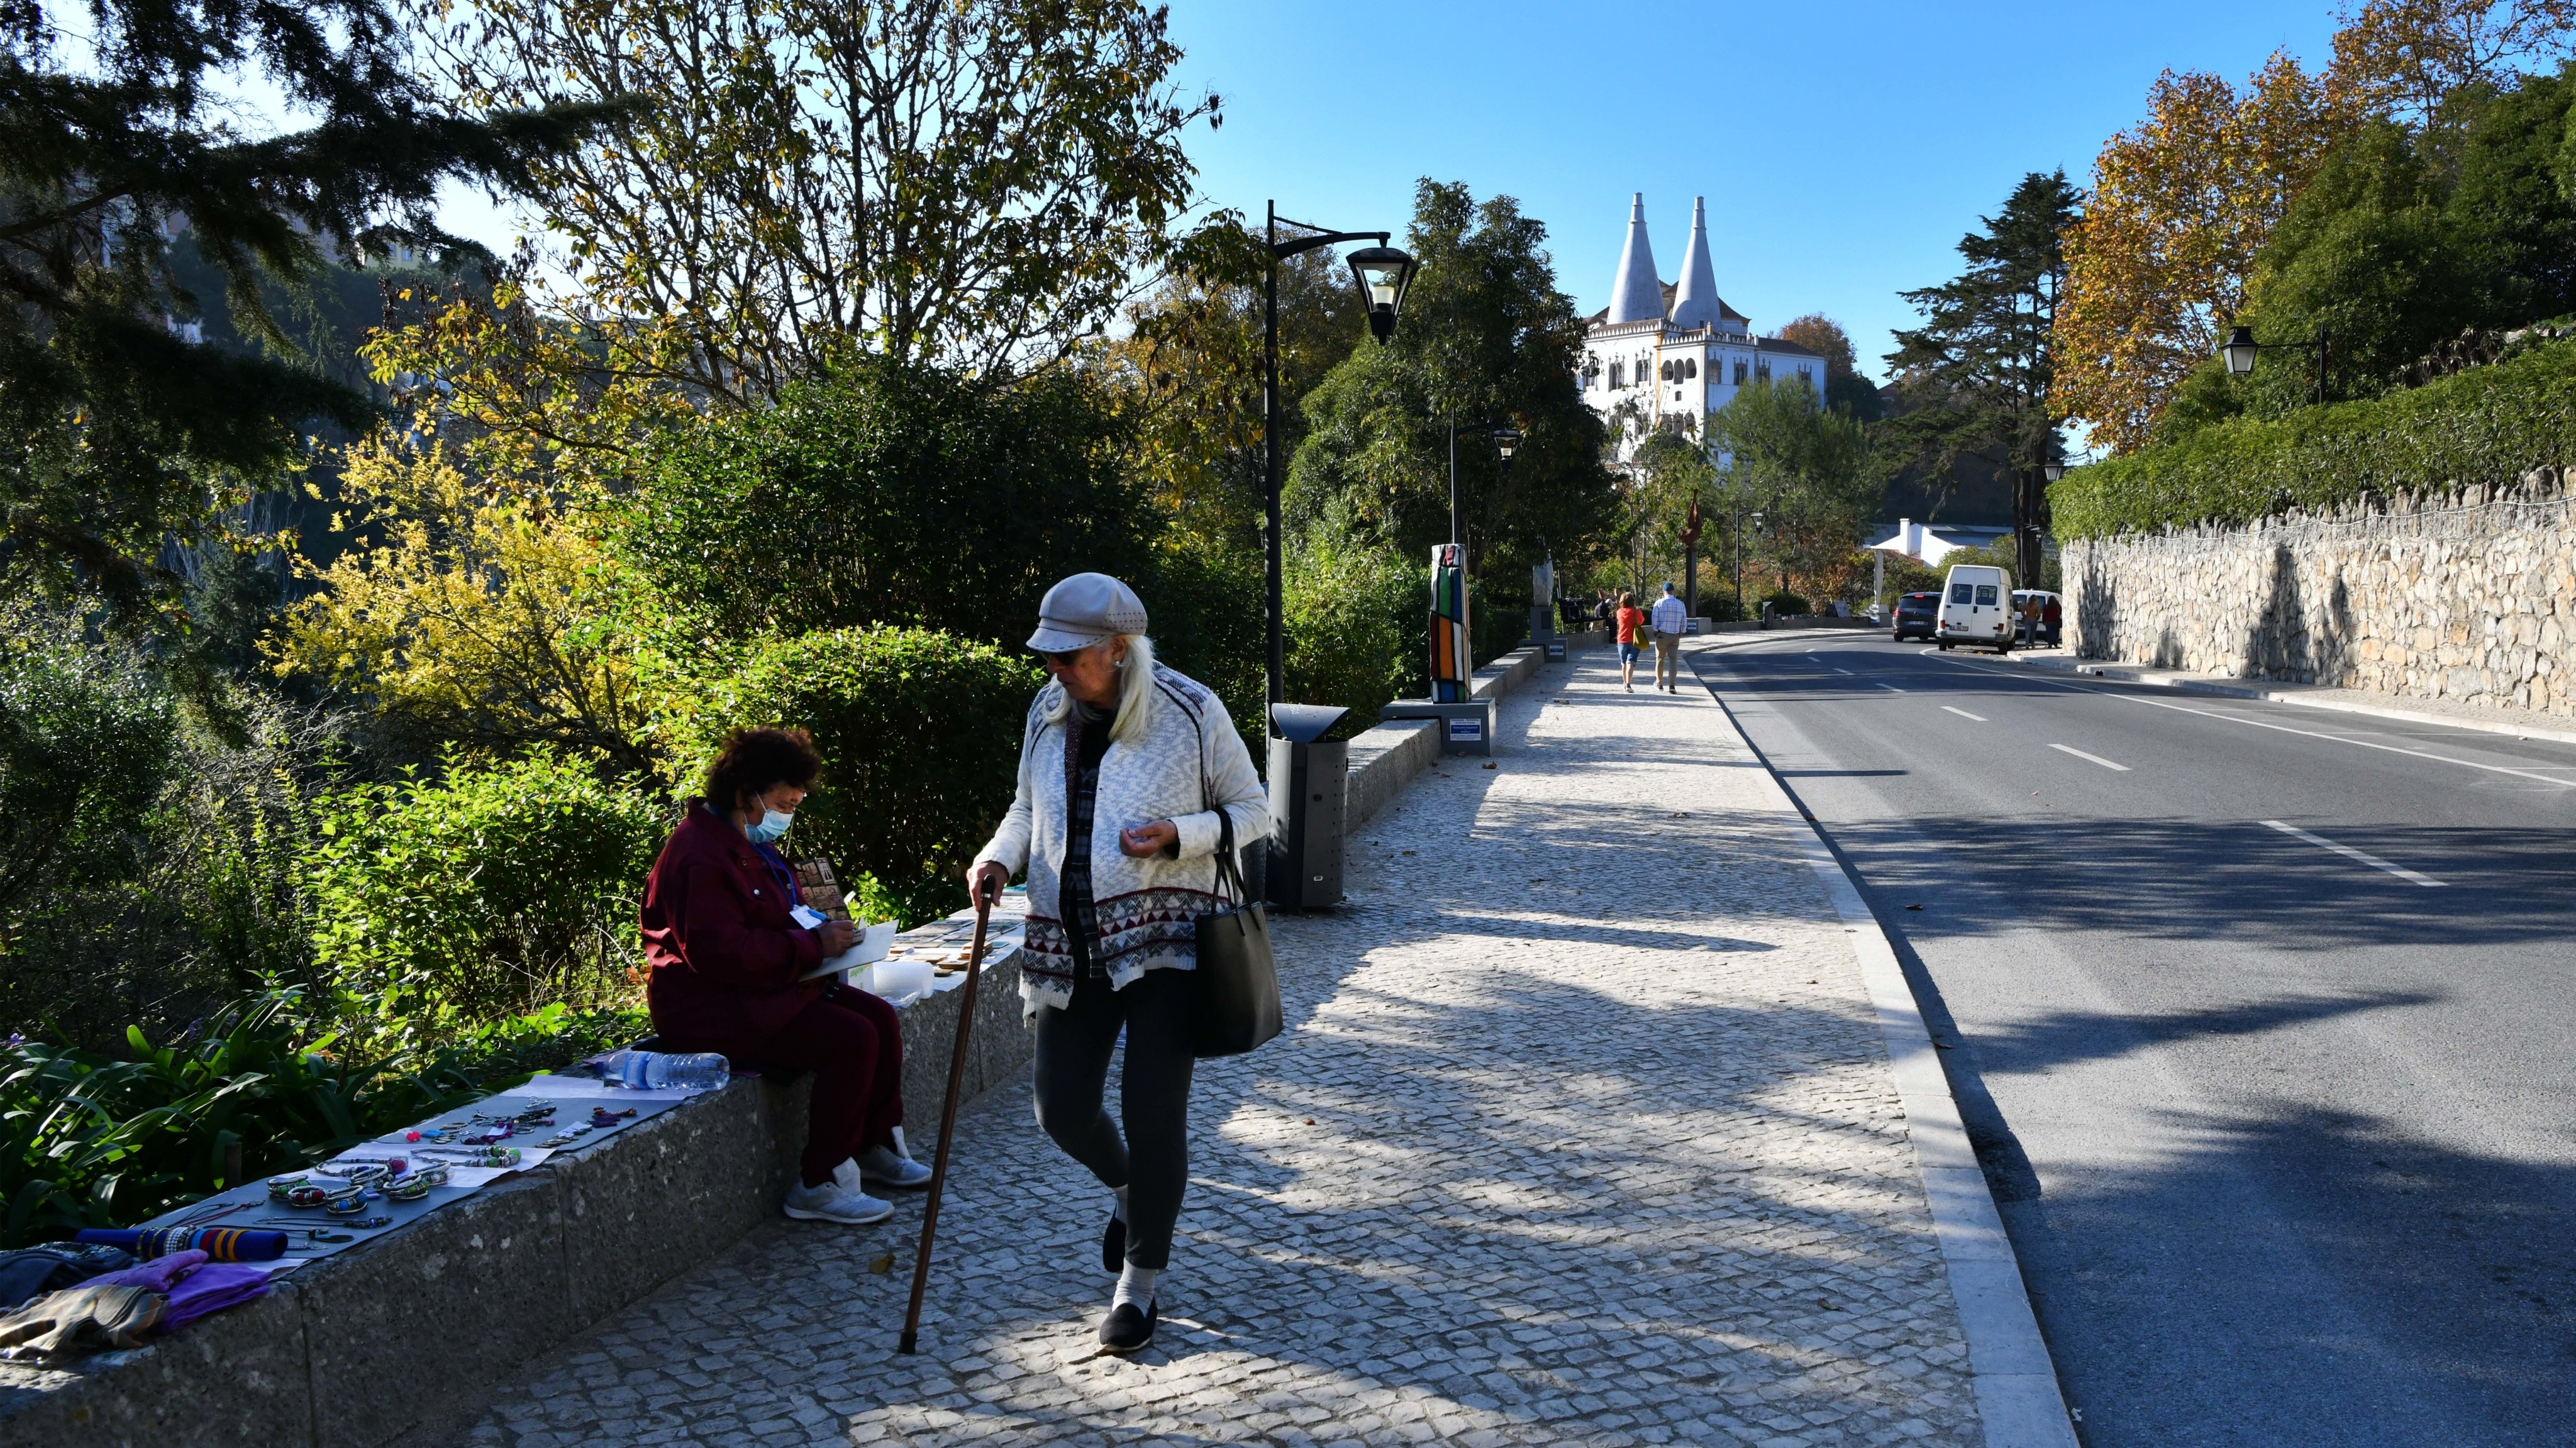 Daily Life In Portugal Amid COVID-19 Pandemic